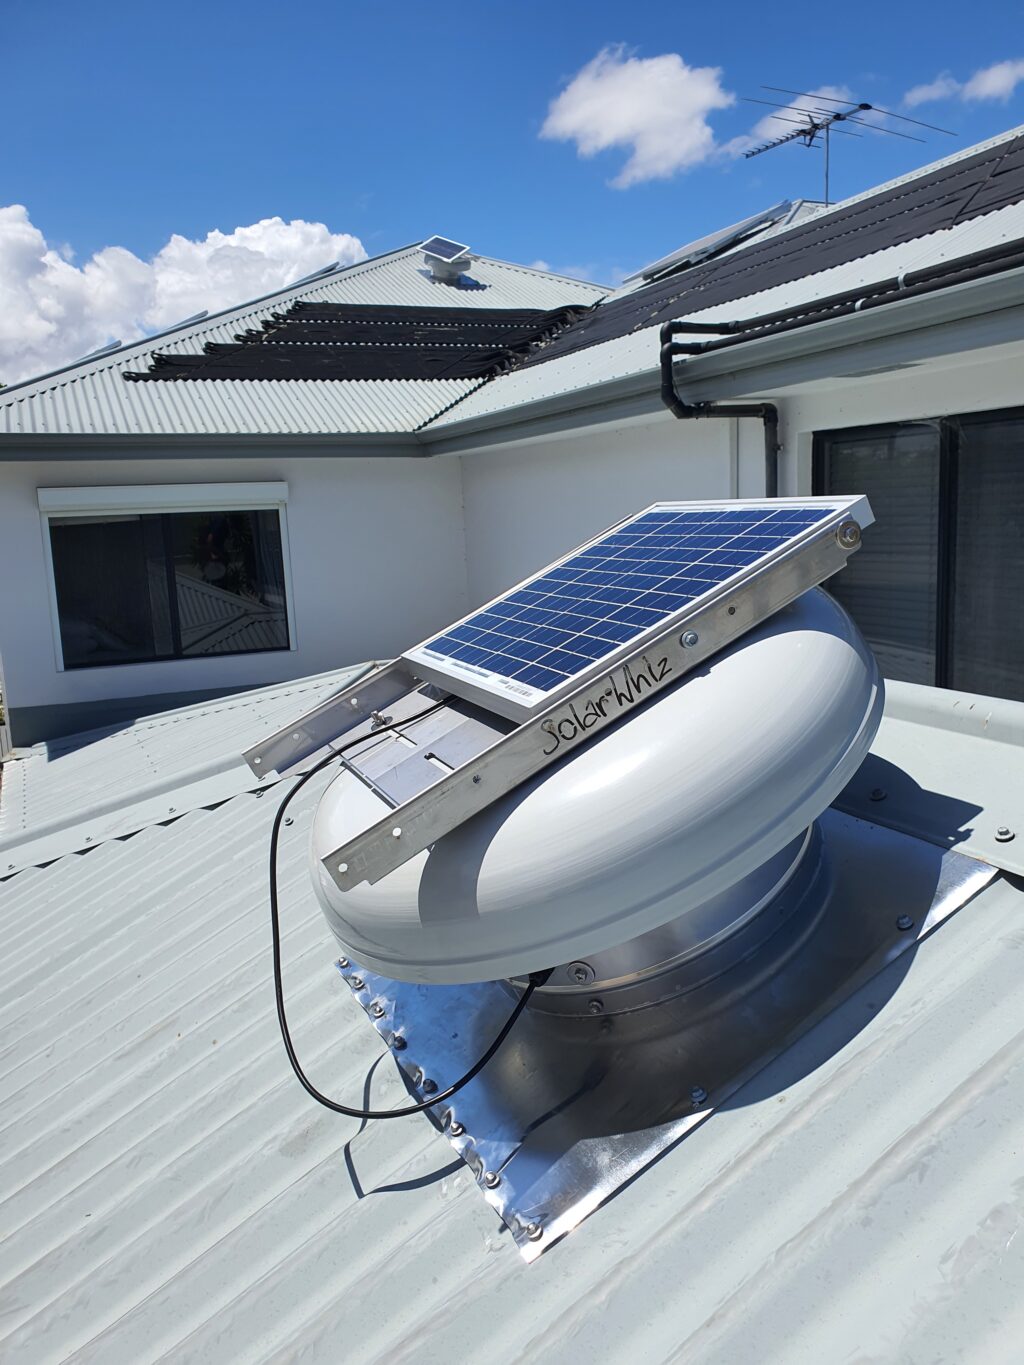 solar fans on roof